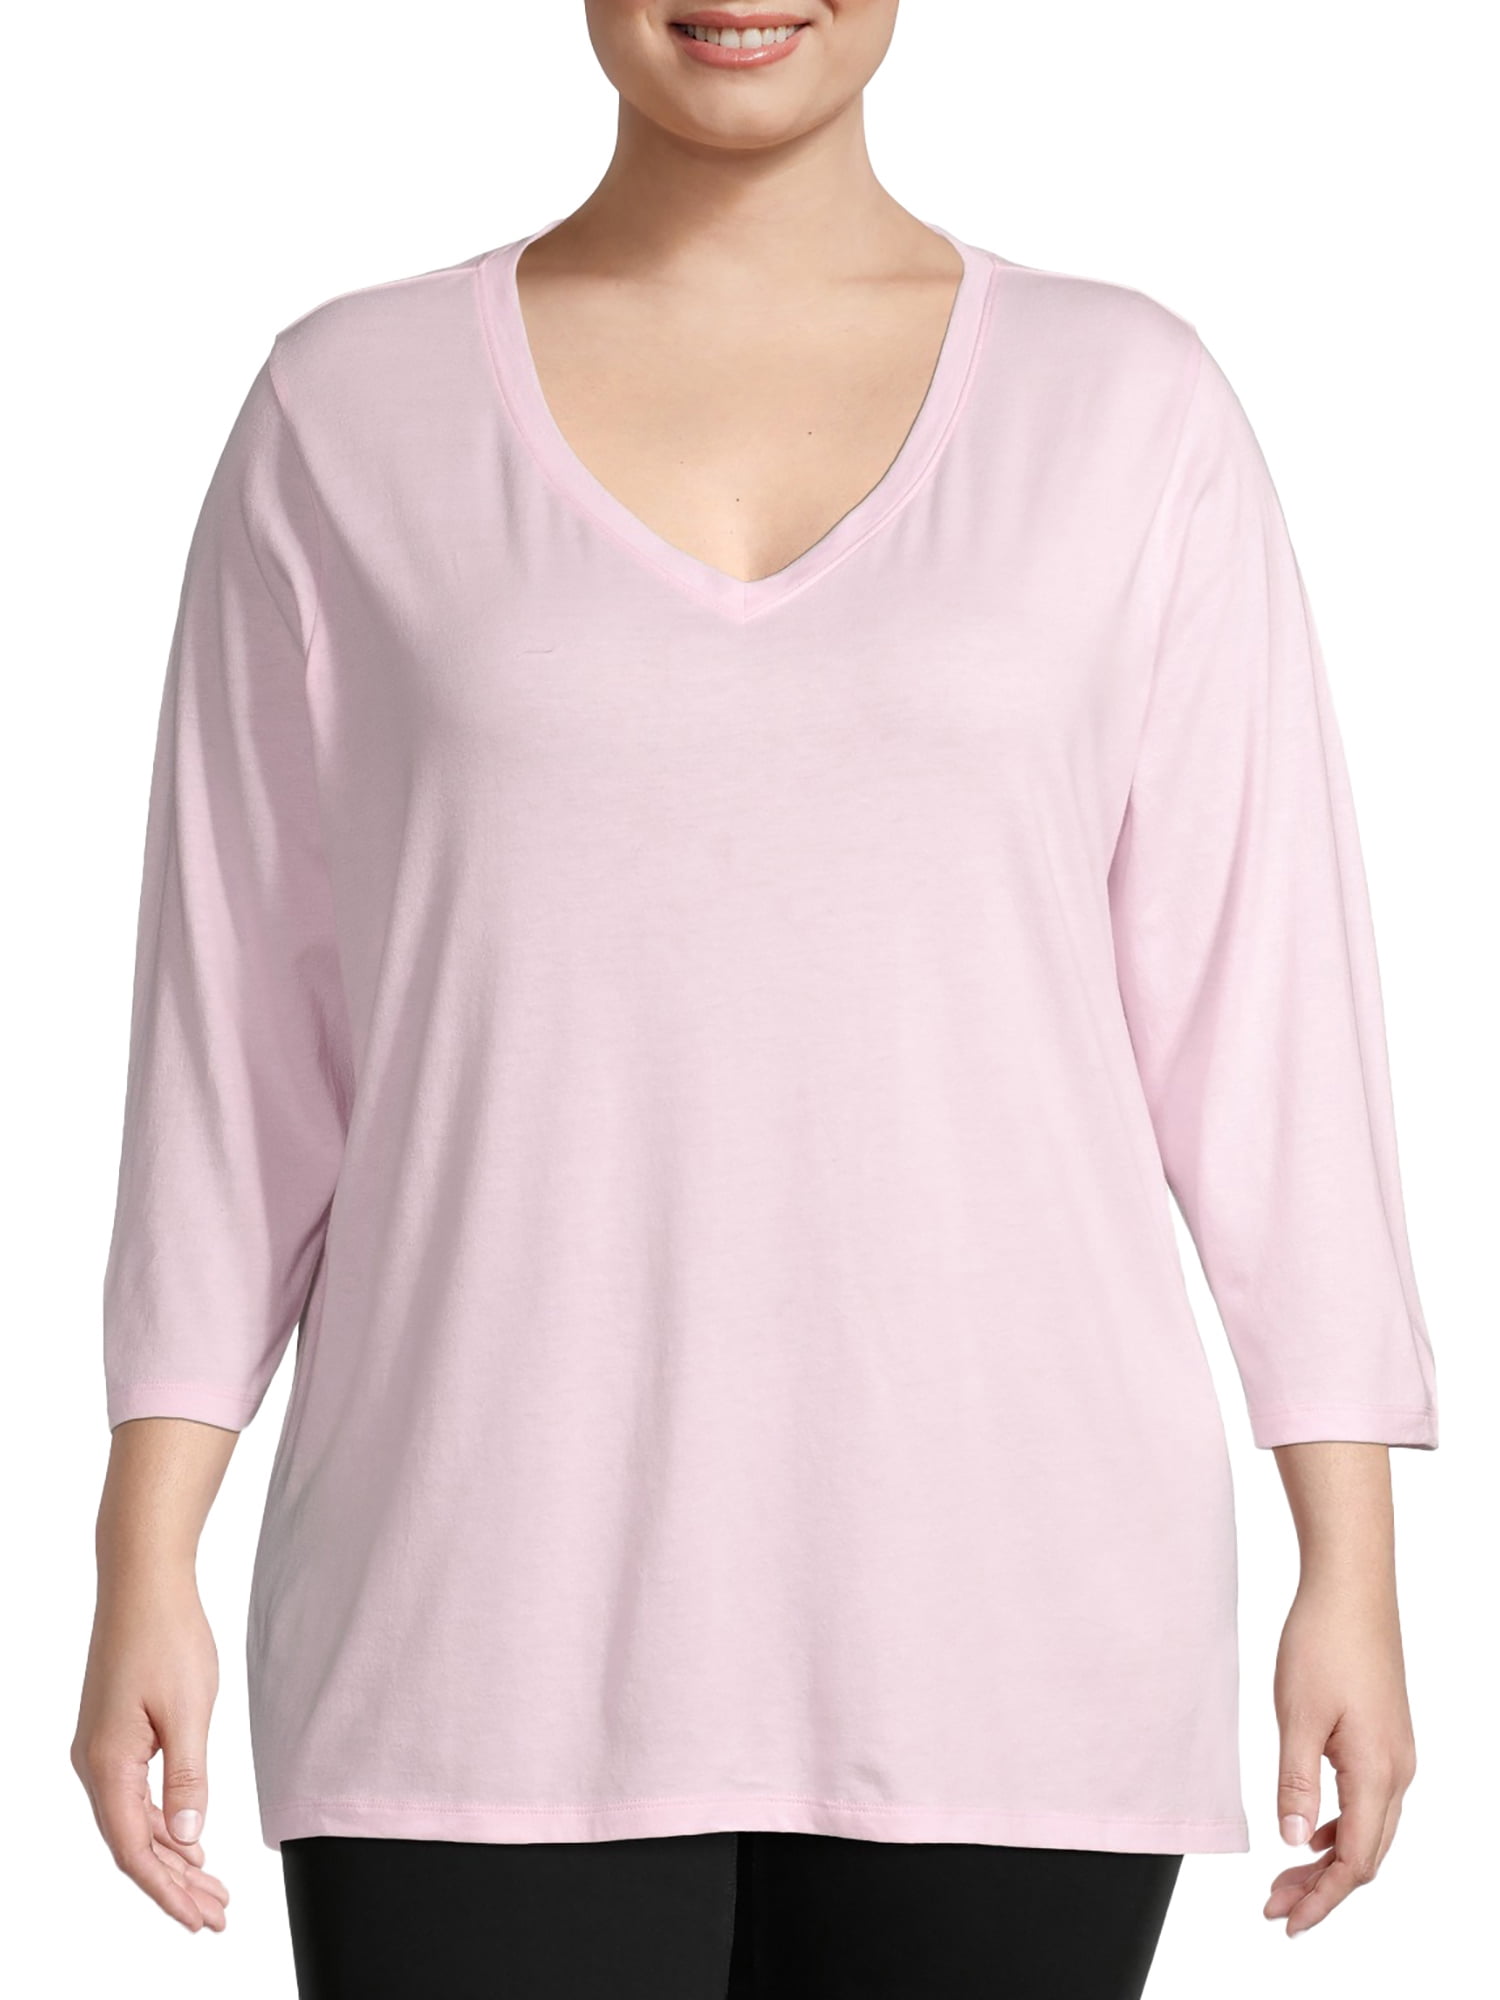 Just My Size Women's Plus-Size Short Sleeve V-Neck Tee, Paleo Pink, 4X